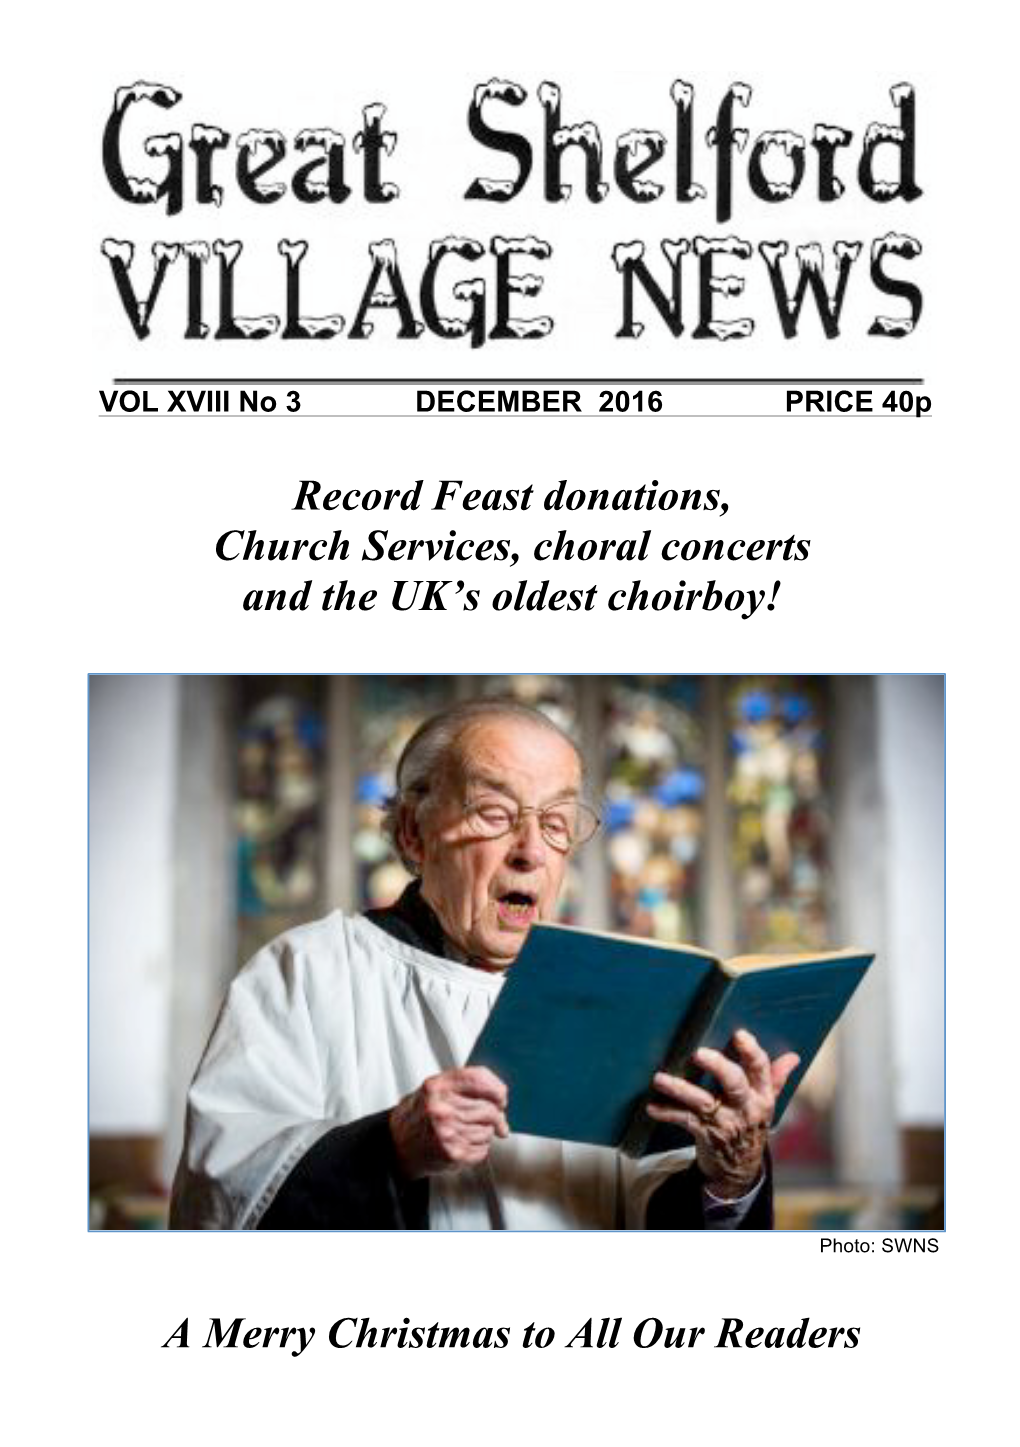 Record Feast Donations, Church Services, Choral Concerts and the UK’S Oldest Choirboy!